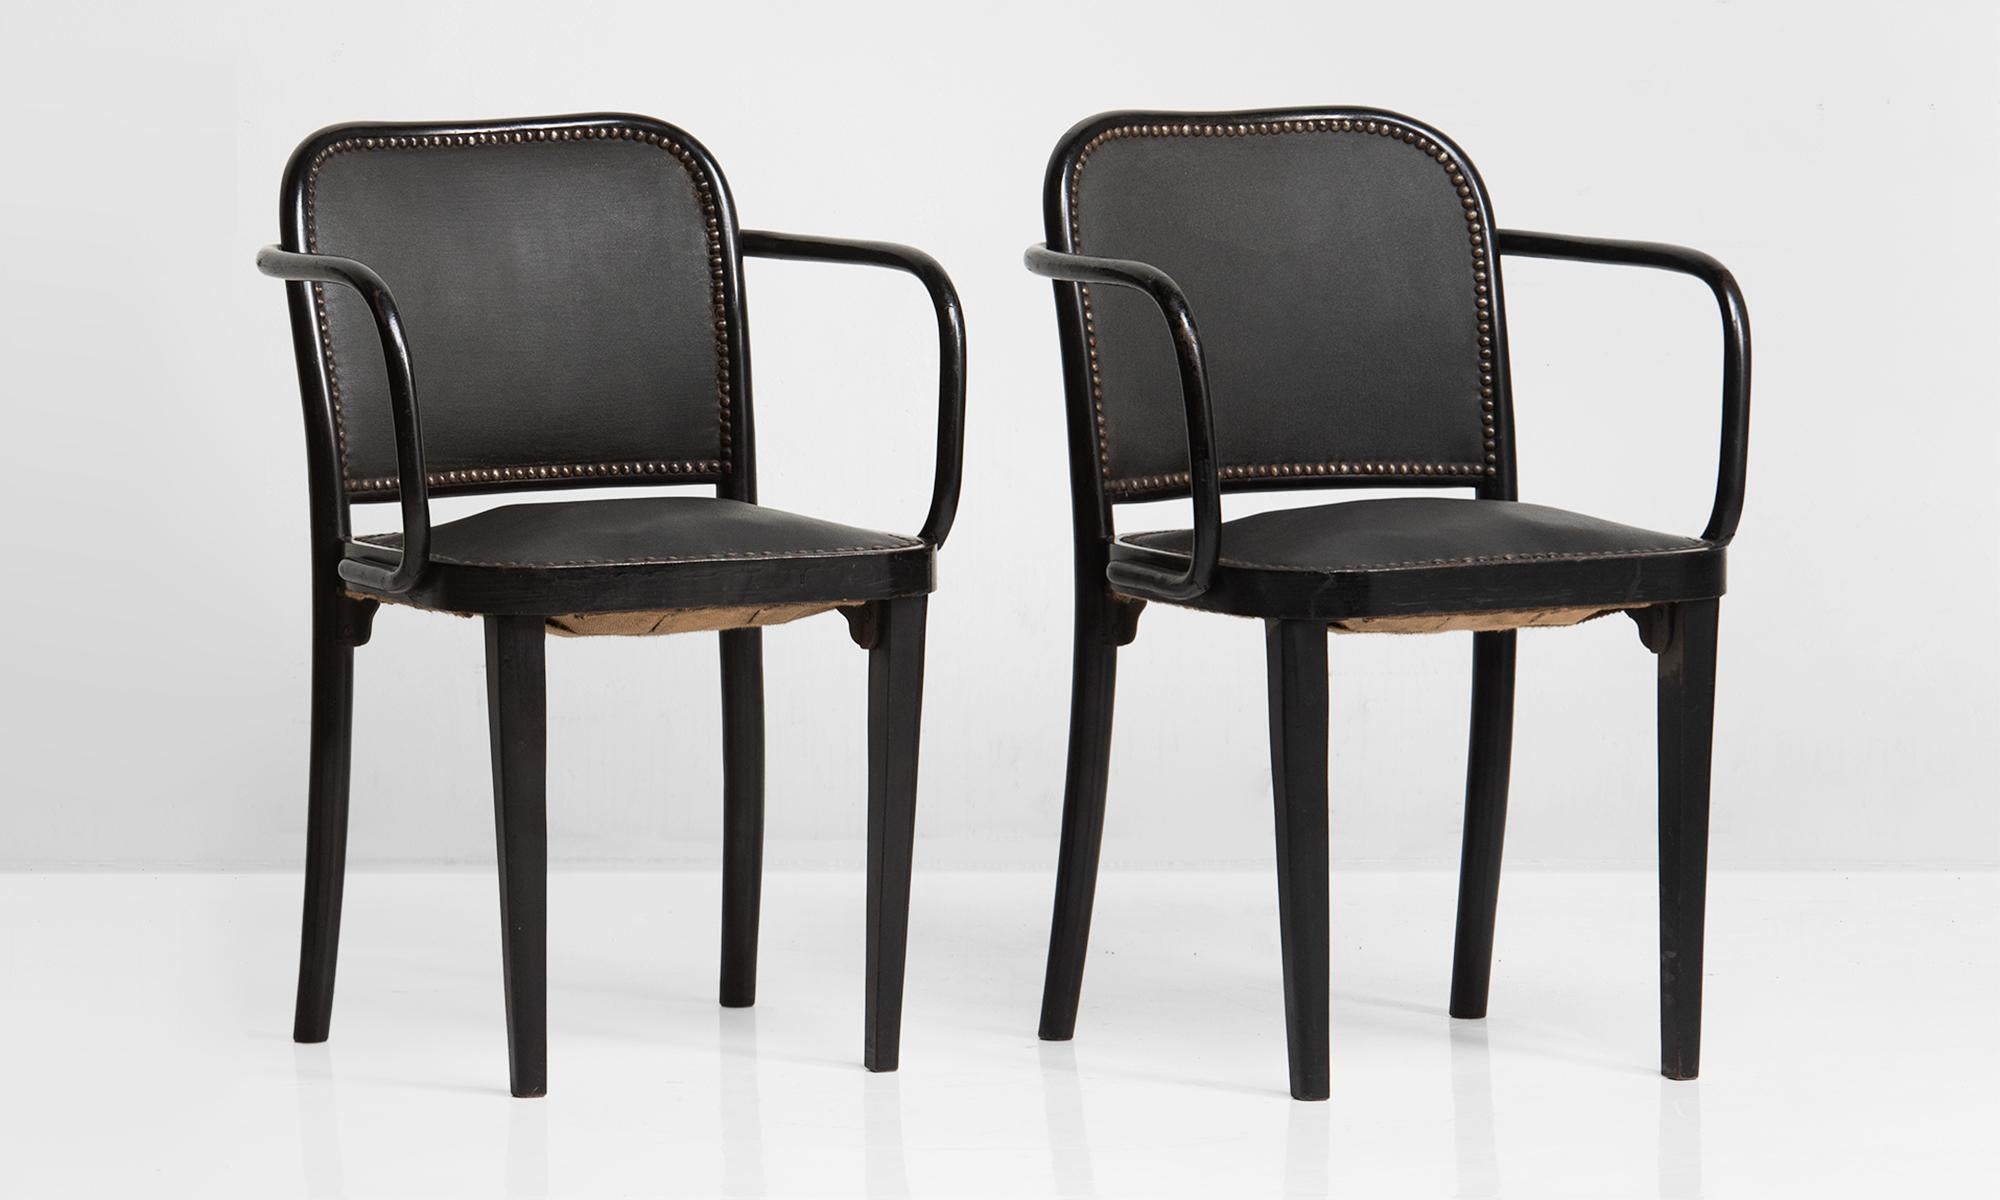 No. 811 armchair by Josef Hoffman, Austria, circa 1925.

Blackened bentwood frame with studded coated canvas upholstery on seat and back.